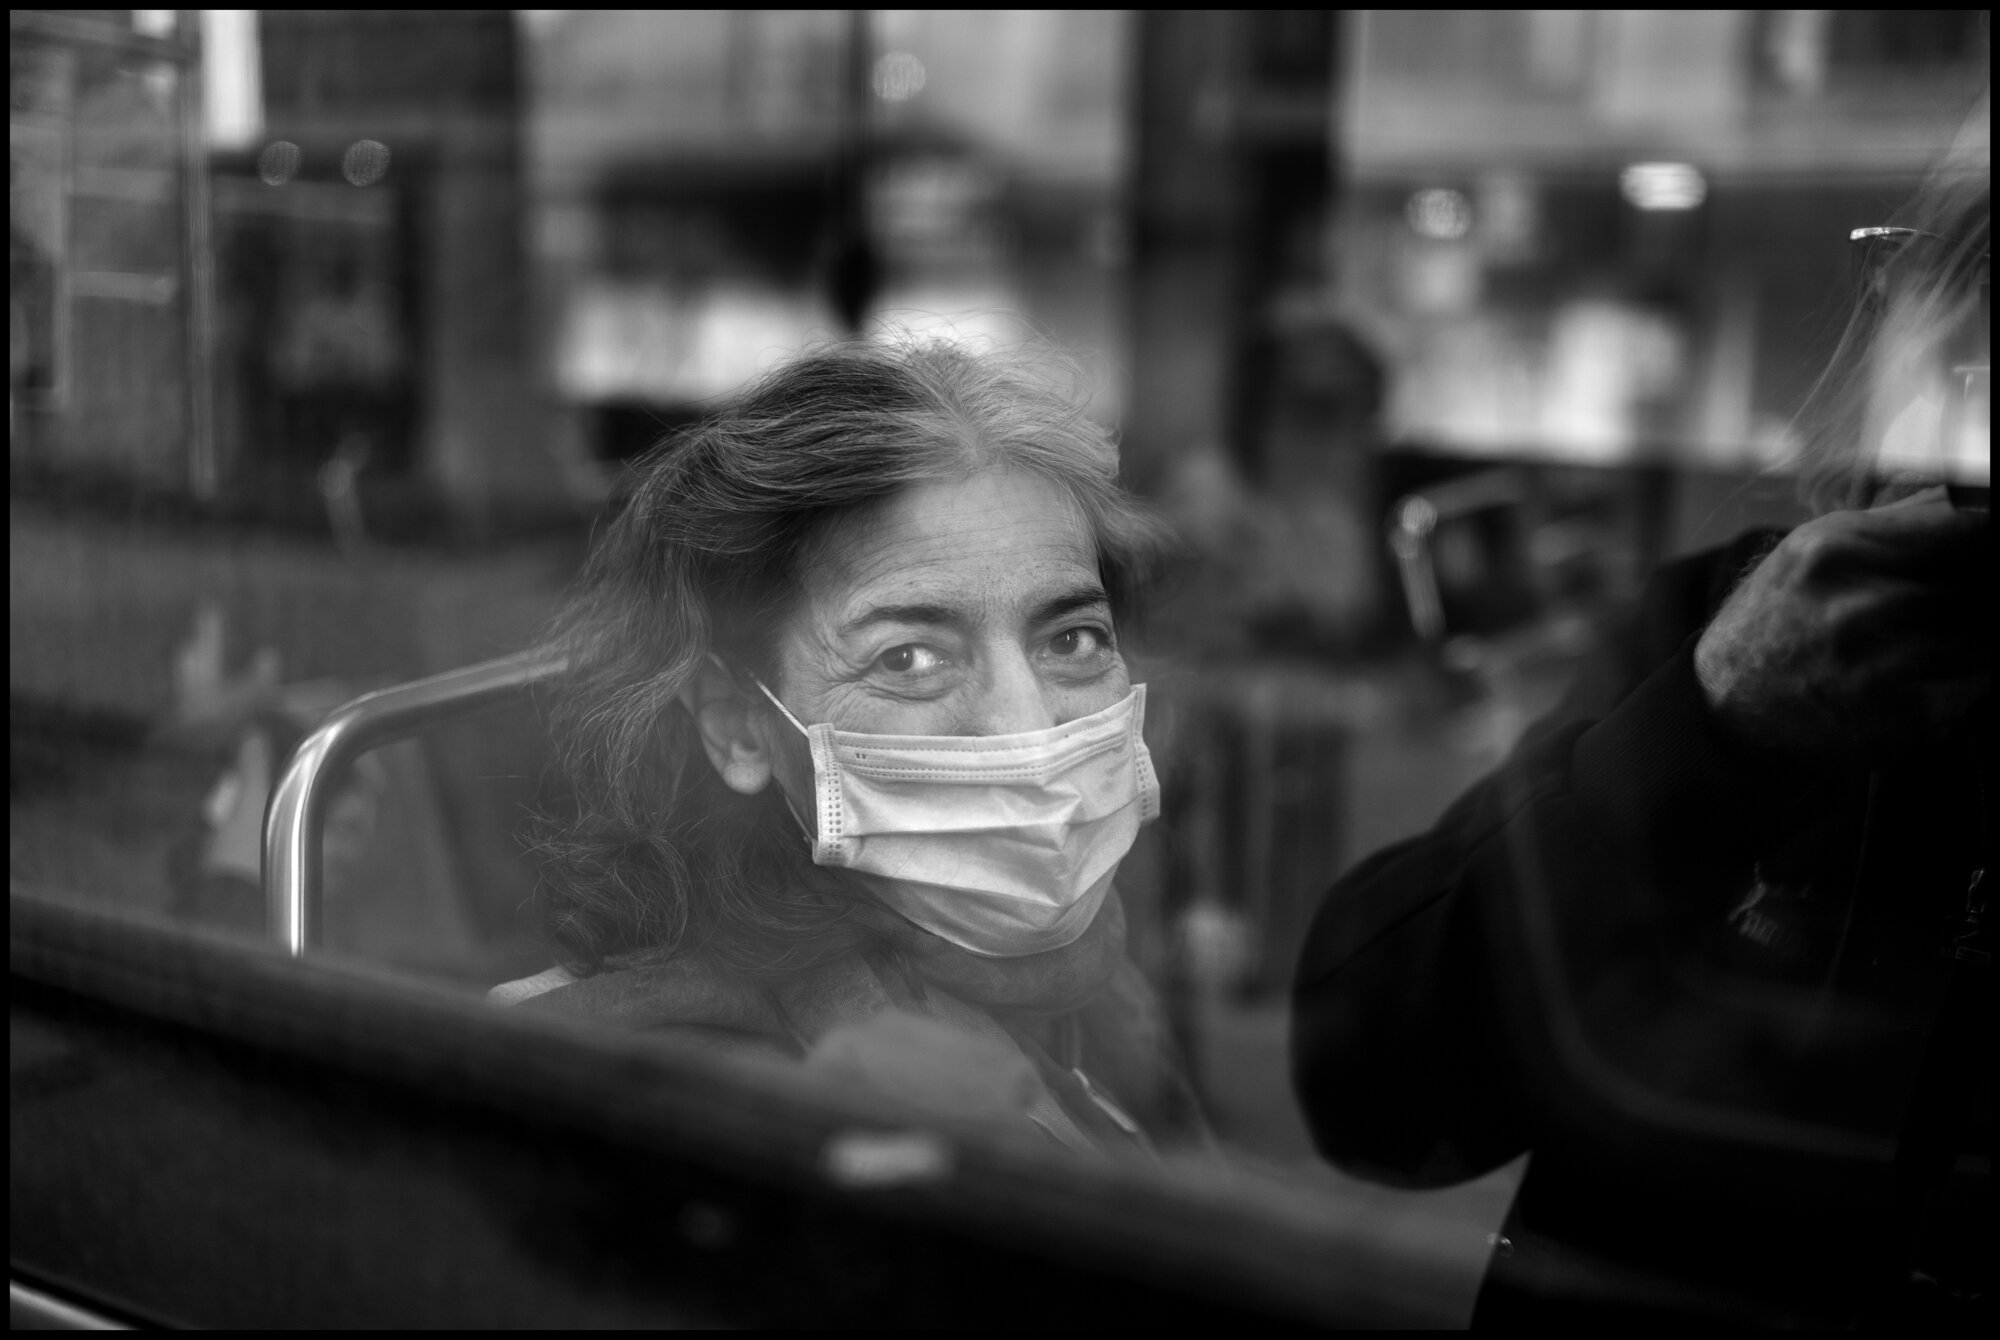  A woman rides a bus up Amsterdam Avenue near 81 st. Street.   March 24, 2020. © Peter Turnley.   ID# 03-004 